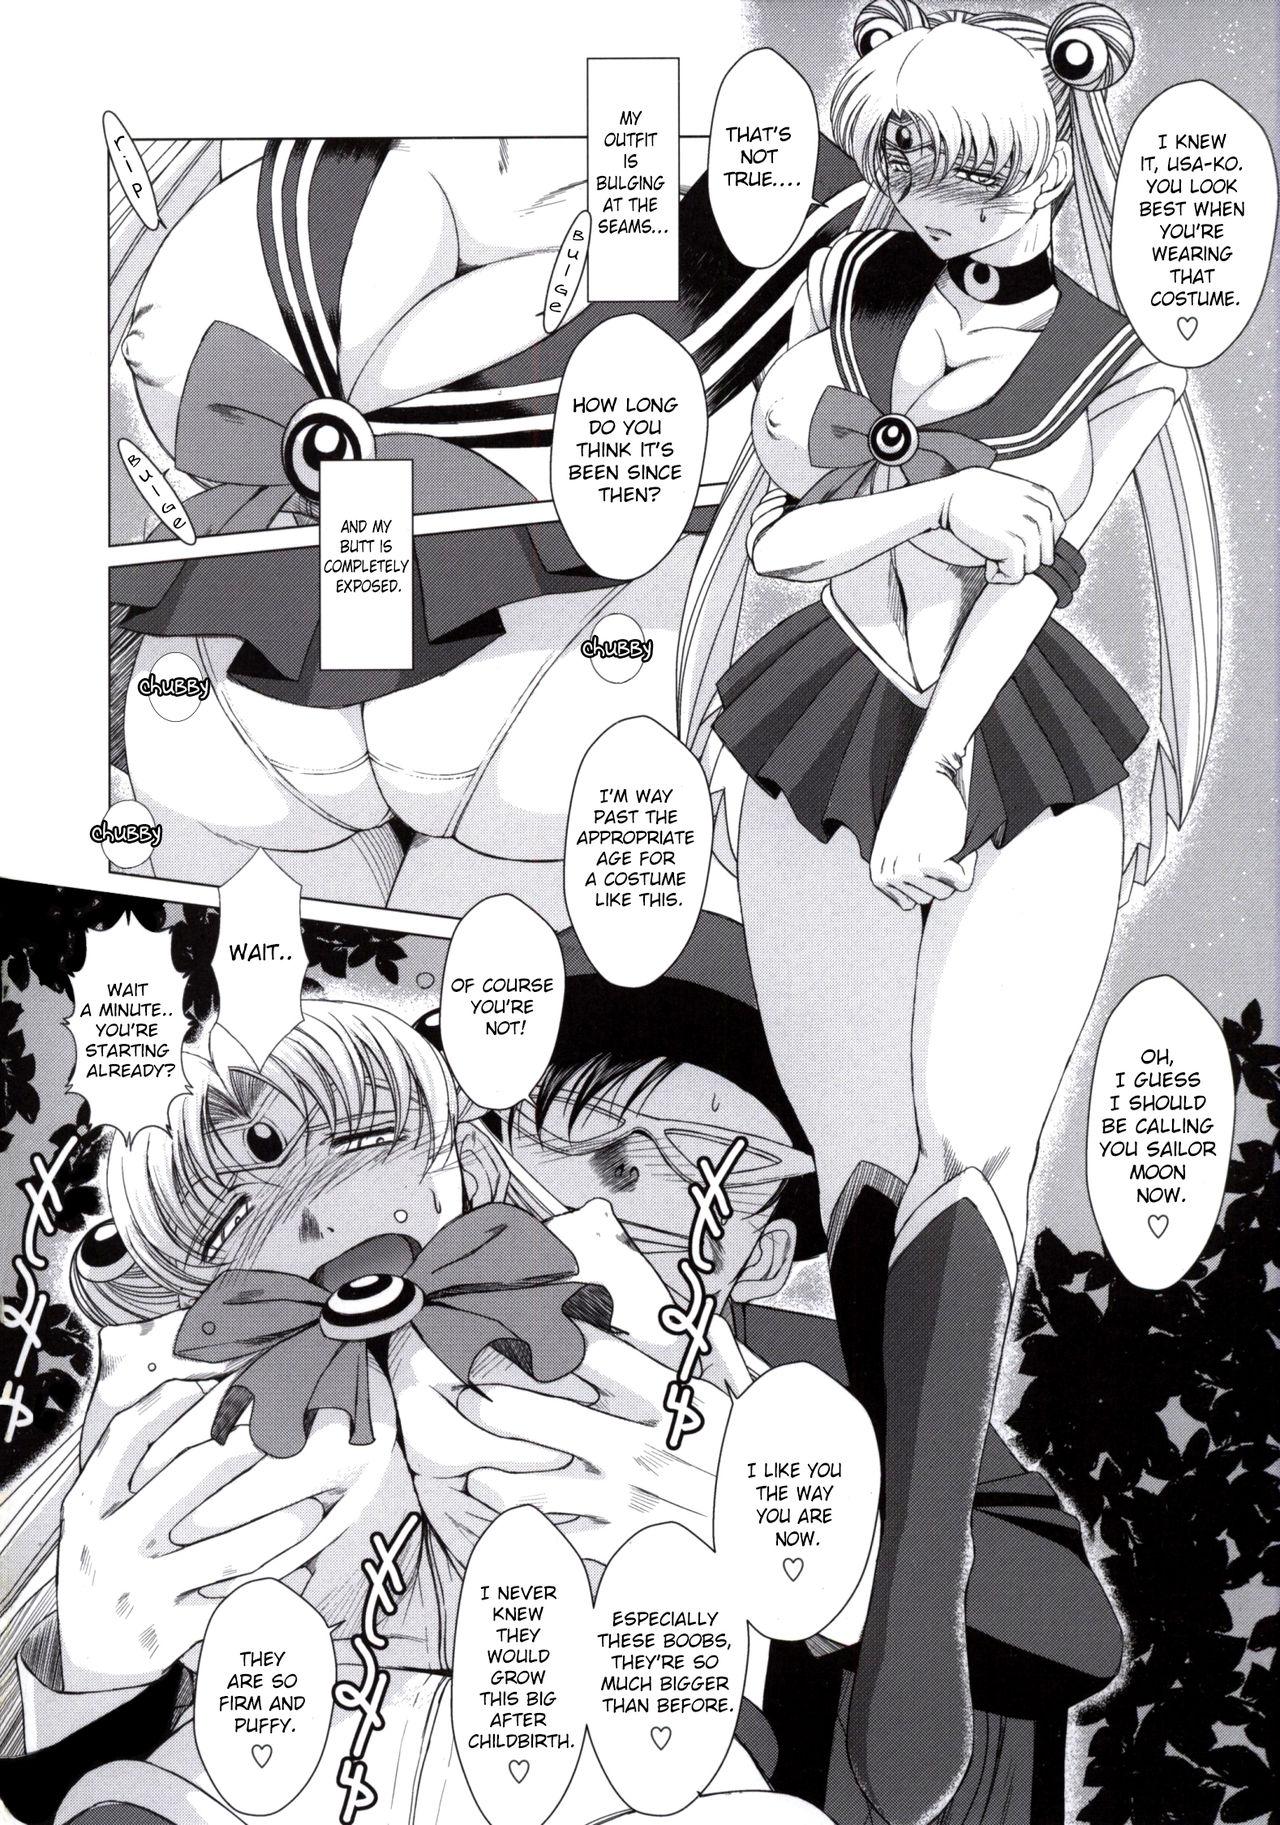 Anale Submission Sailormoon After/Midgard - Sailor moon Ah my goddess Big Ass - Page 3